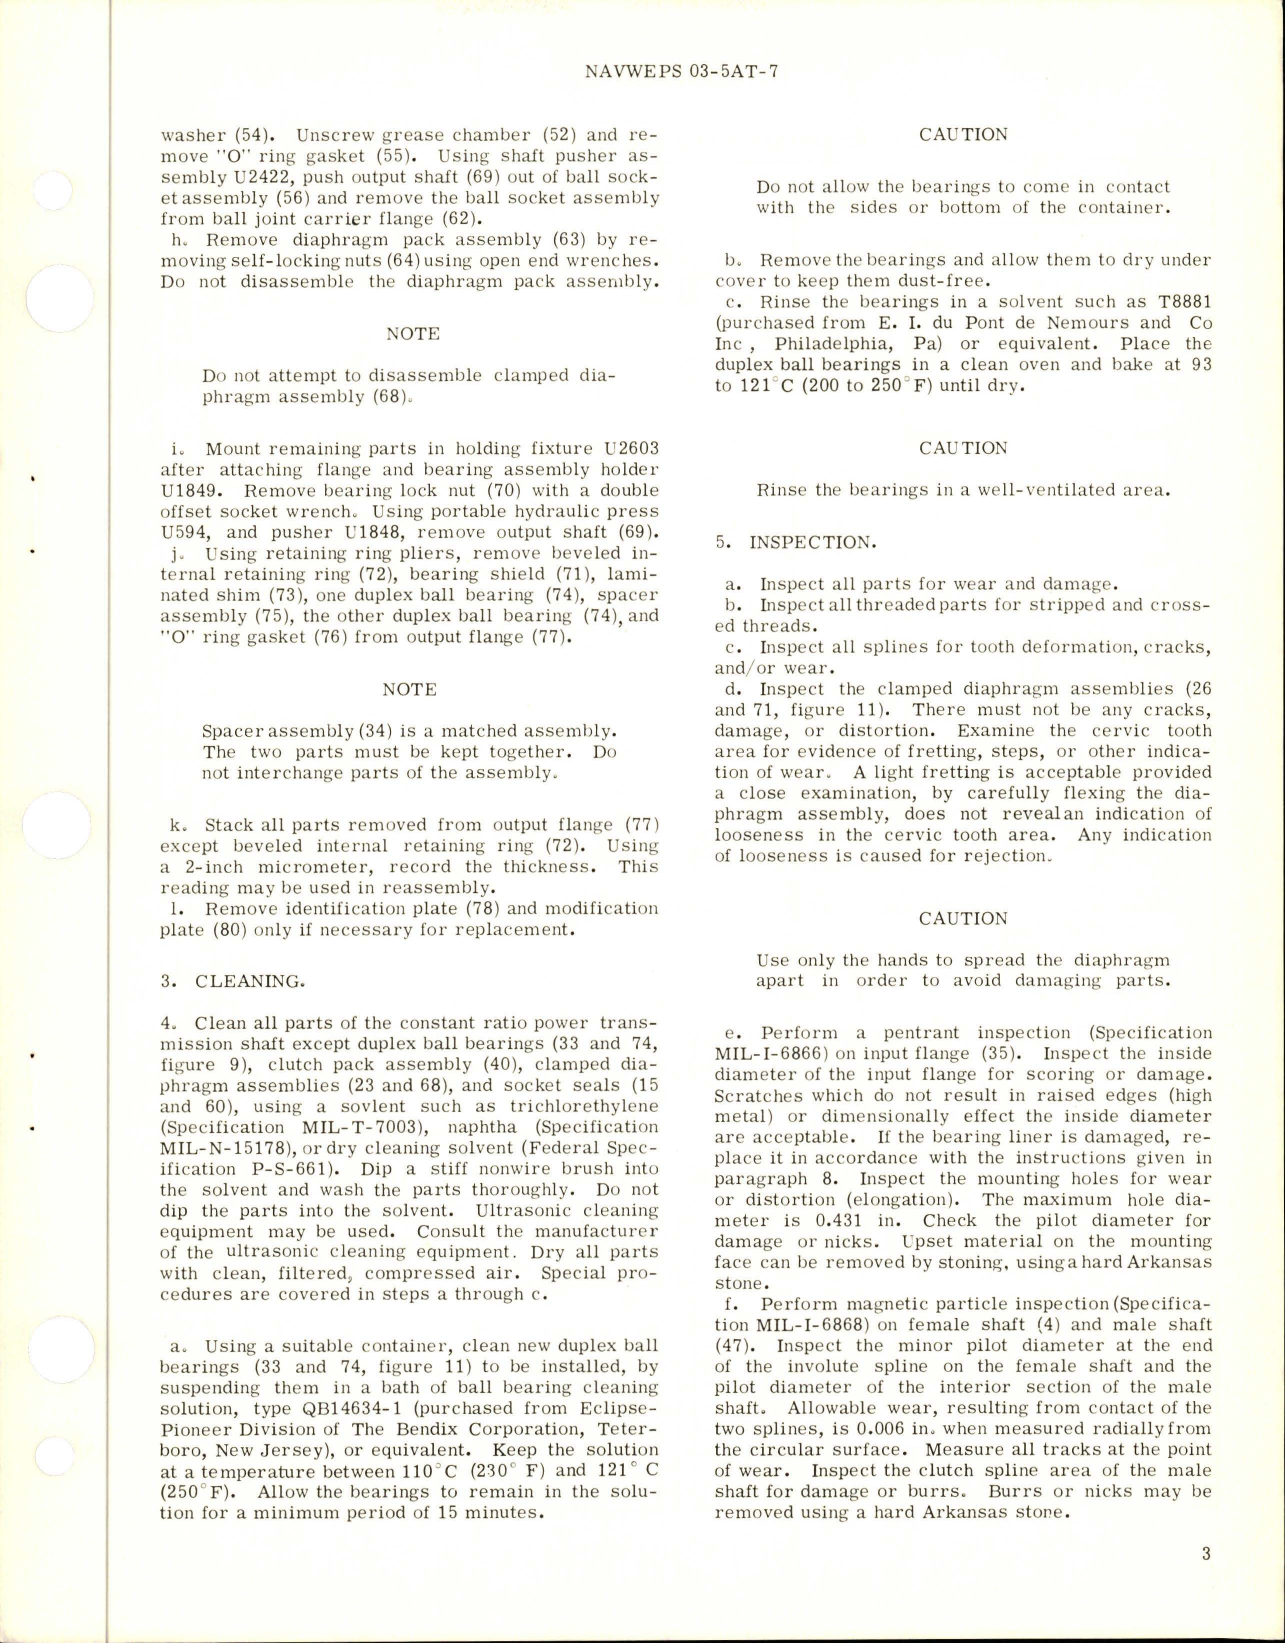 Sample page 5 from AirCorps Library document: Overhaul Instructions with Parts Breakdown for Constant Ratio Power Transmission Shaft 